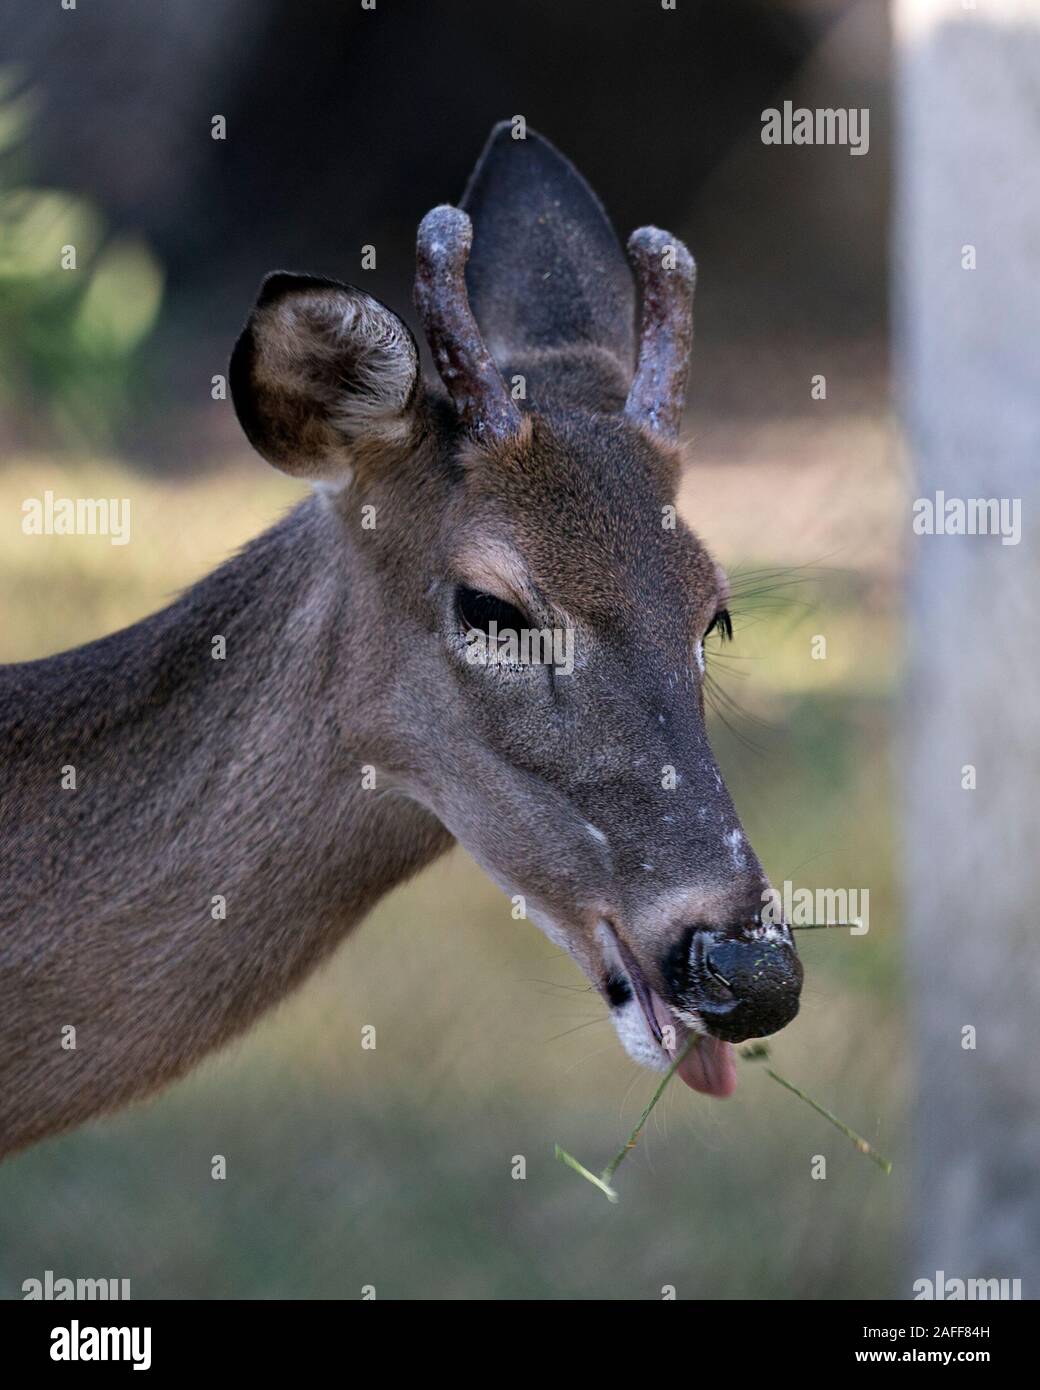 Deer animal White-tailed dear head close-up profile view eating grass with bokeh background, displaying head, antlers, ears, eye, mouth, nose, brown f Stock Photo